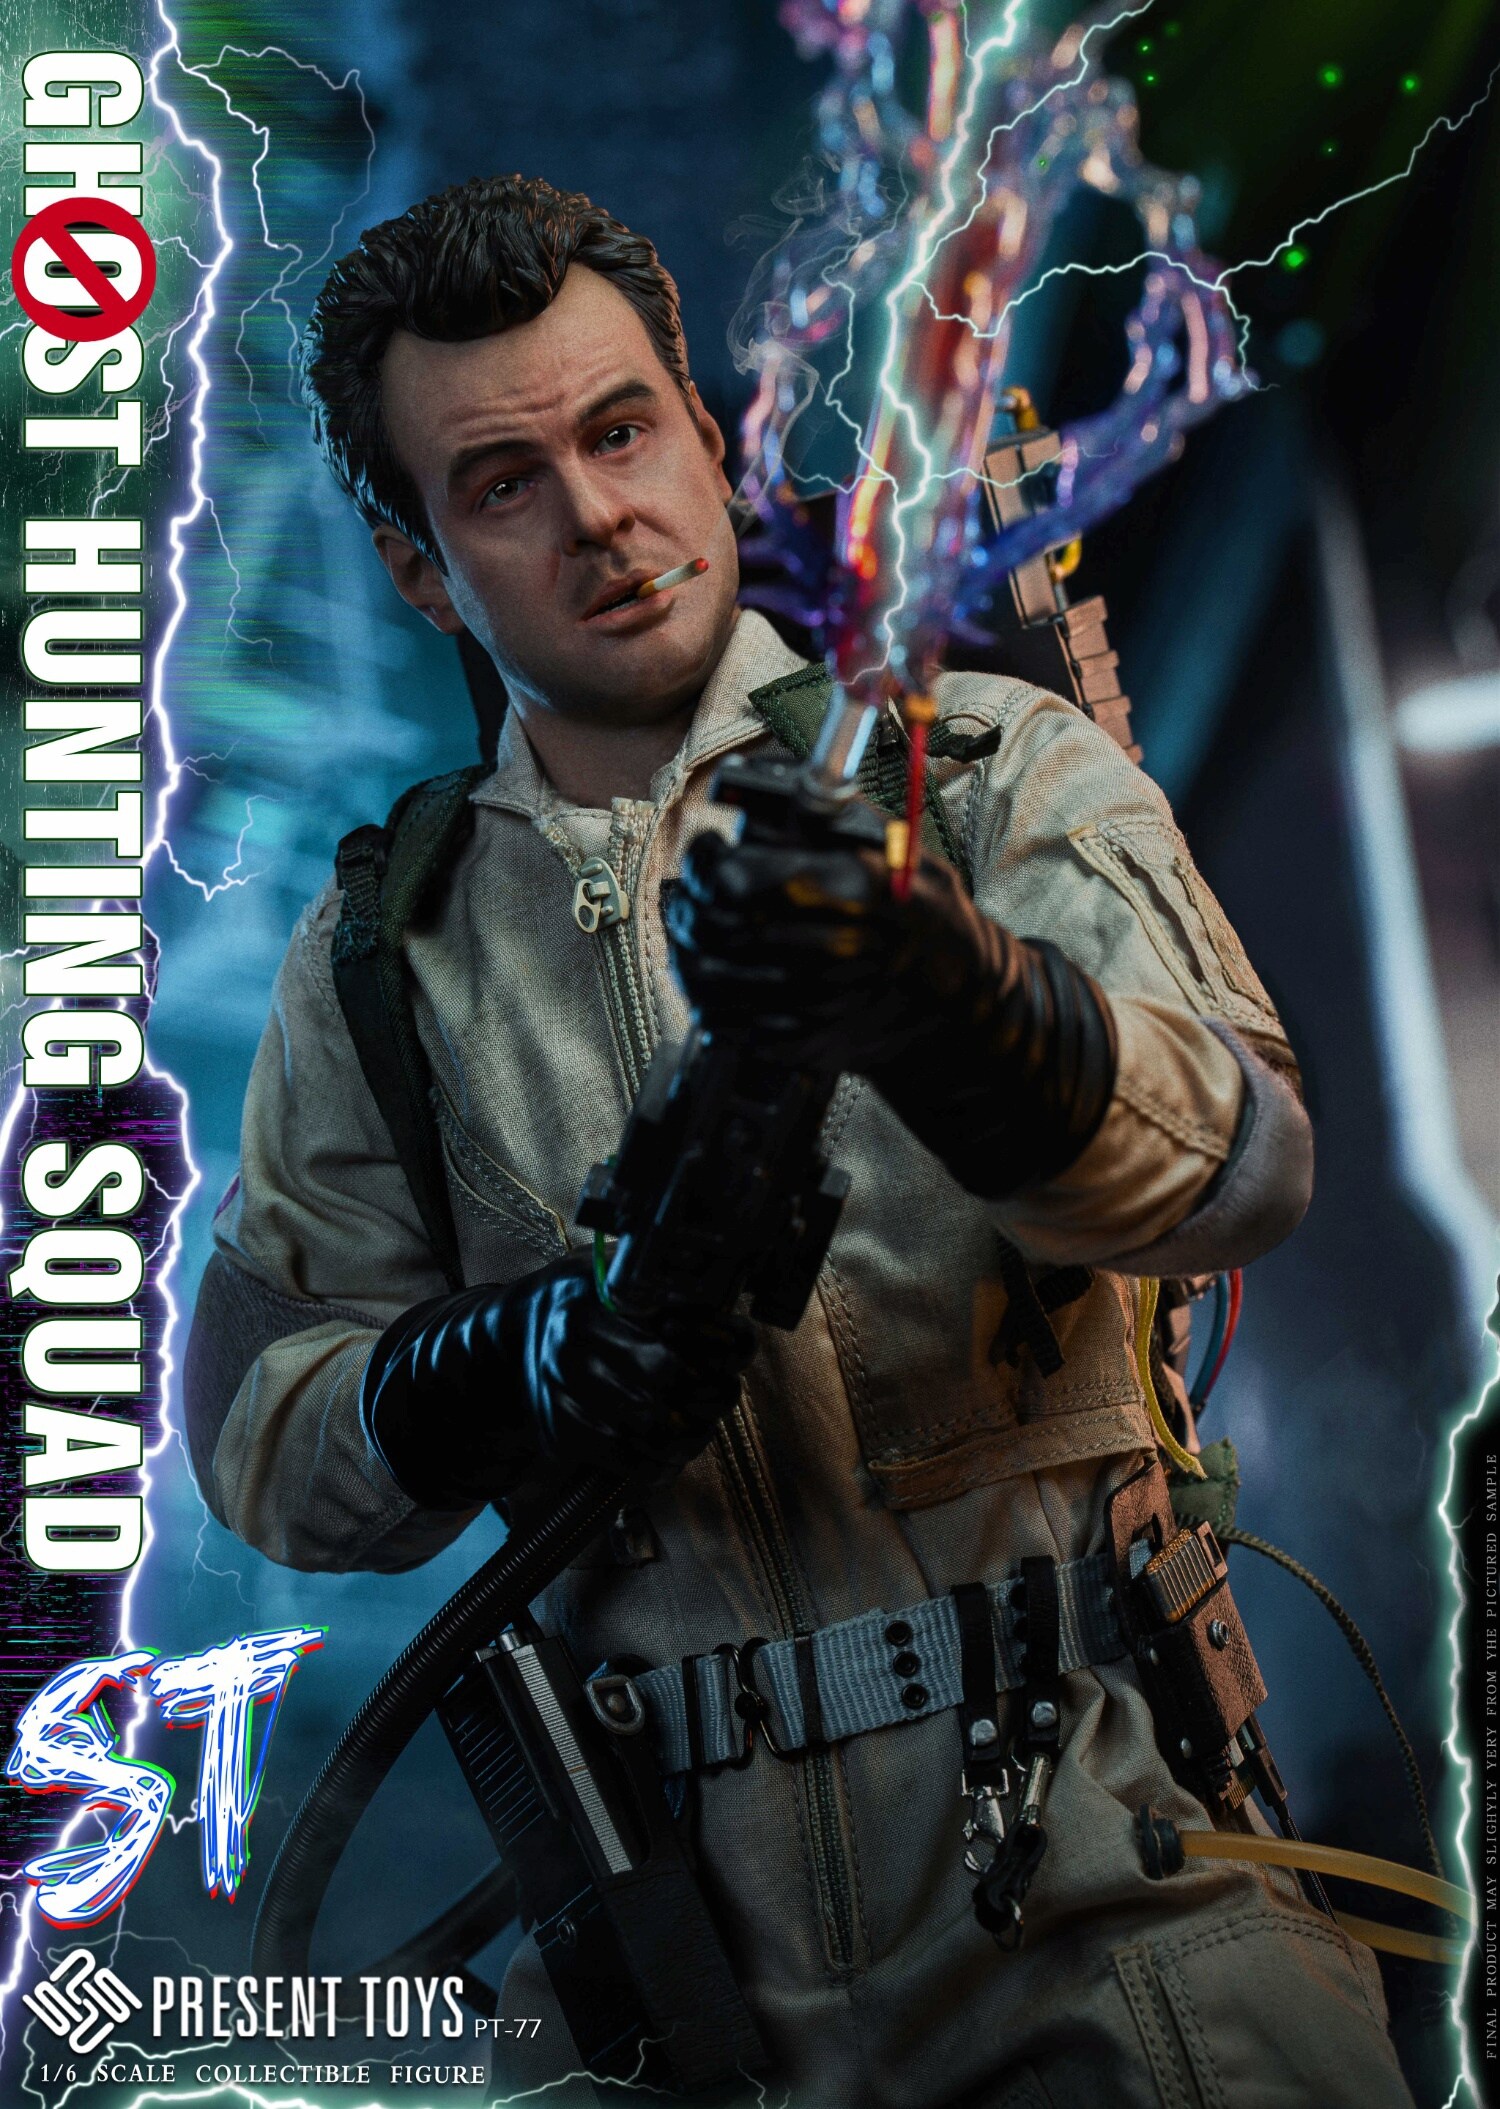 Ghostbusters - NEW PRODUCT: PRESENT TOYS - Ghostbusters-ST Agent & SP Agent Collection #PT-sp77/PT-sp78 03180